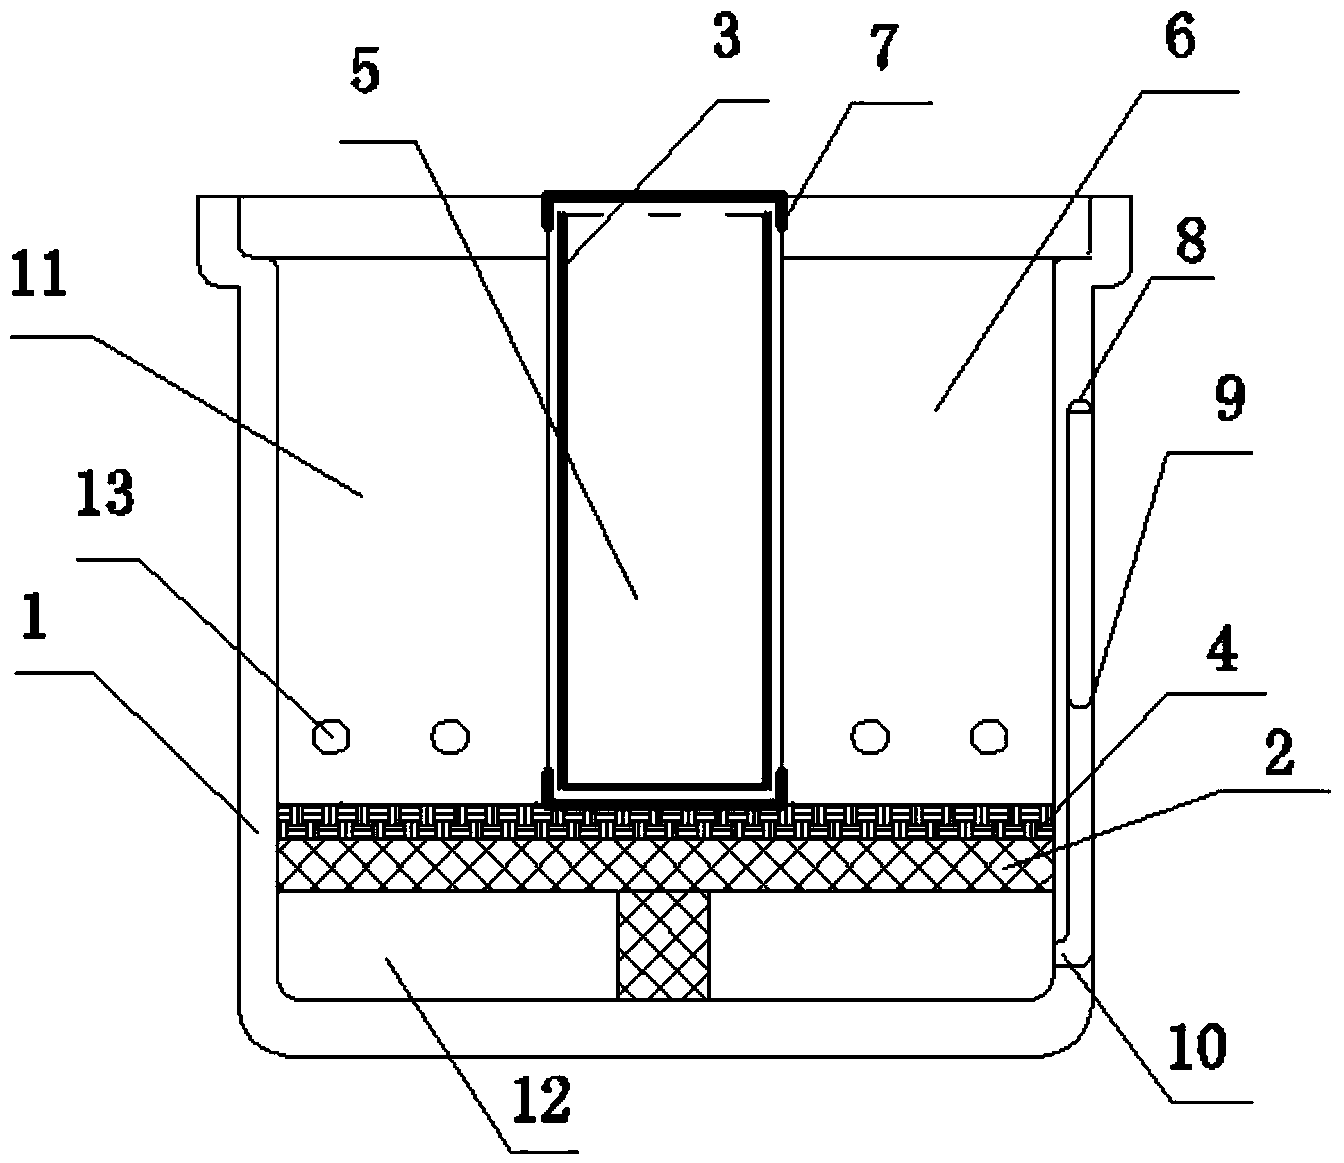 Comprehensive plant root bag culture apparatus capable of separating and collecting rhizosphere soil